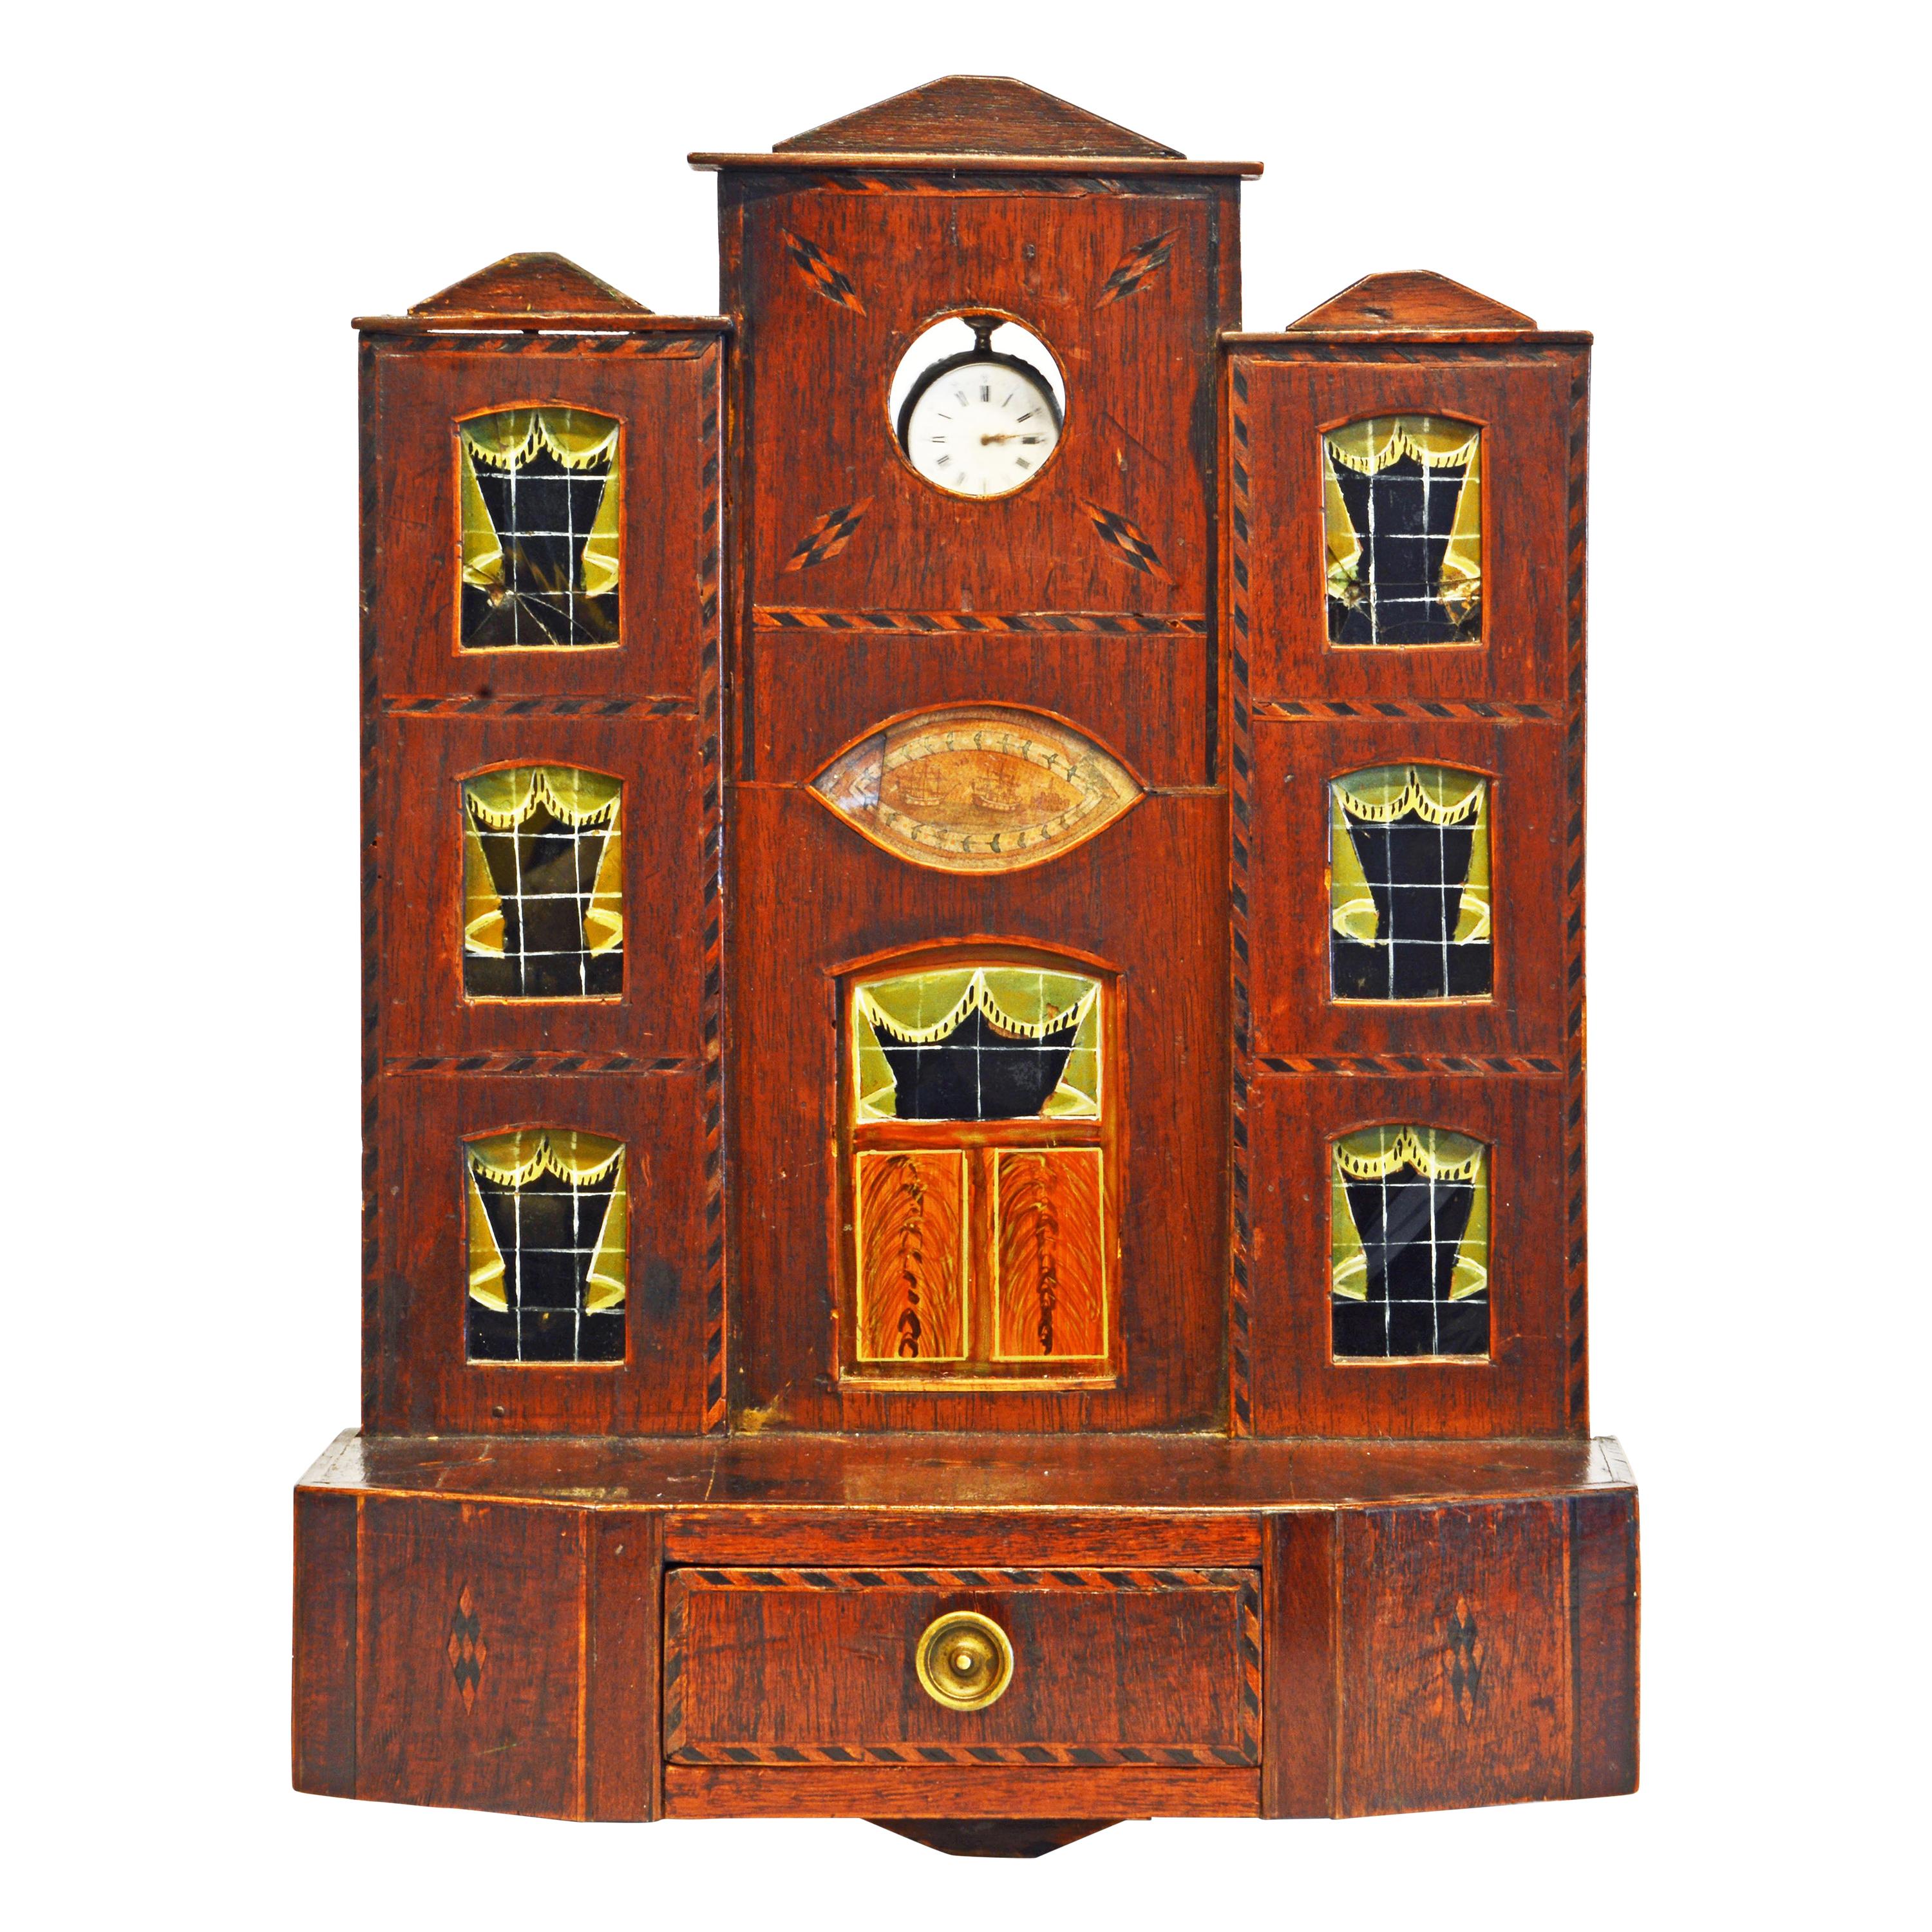 Early American Folk Art Pocket Watch Stand or Hutch in the form of a House